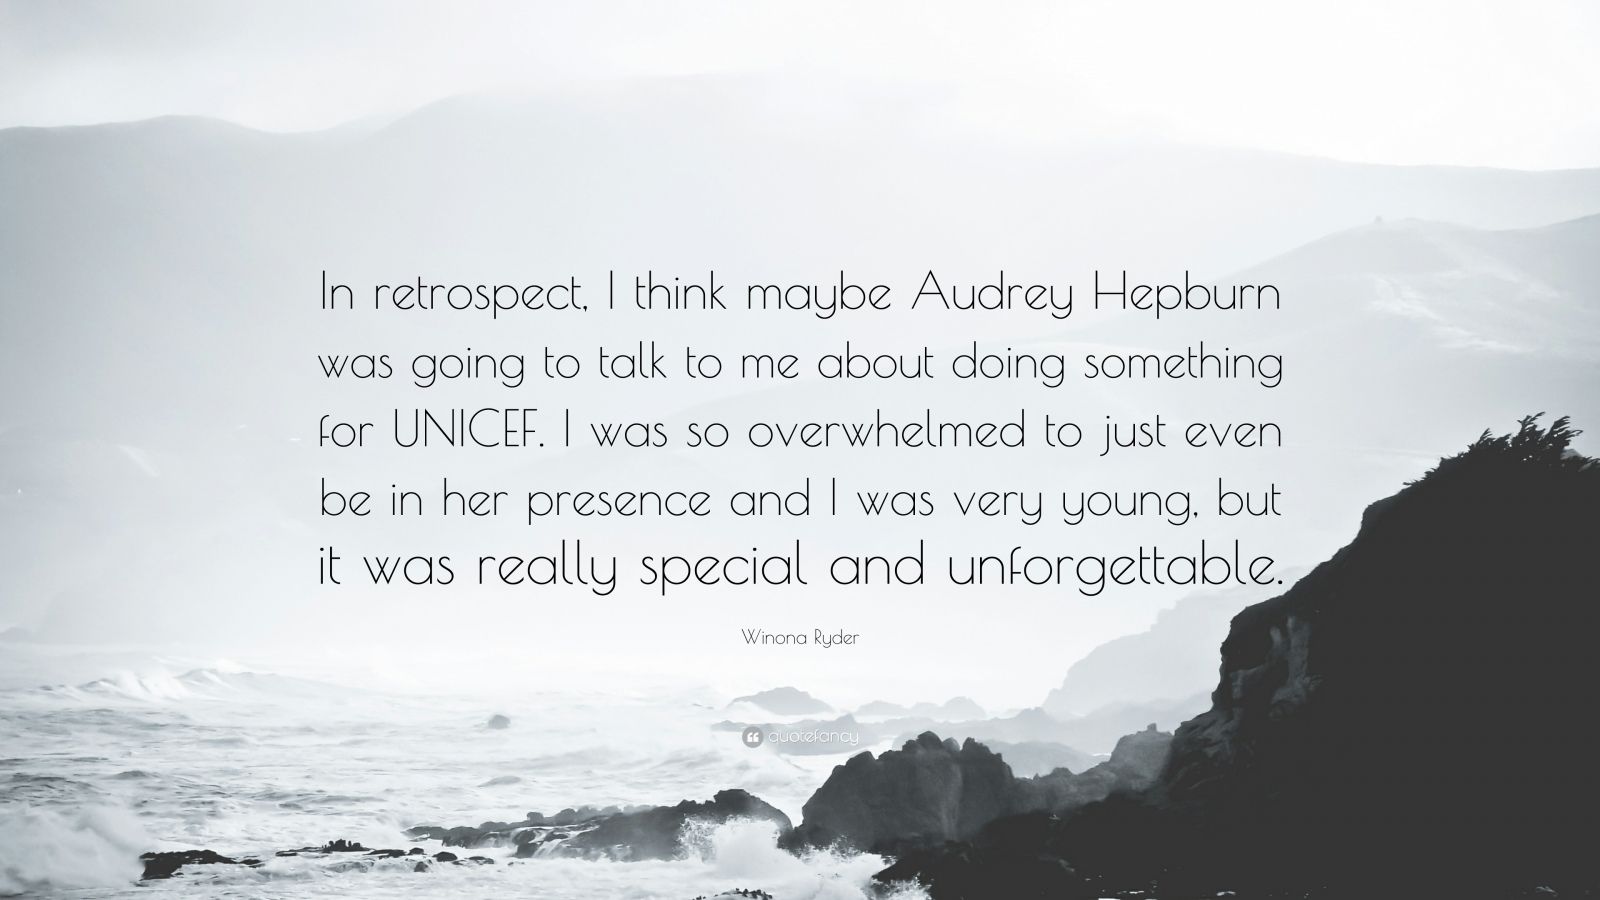 Winona Ryder Quote “In retrospect I think maybe Audrey Hepburn was going to